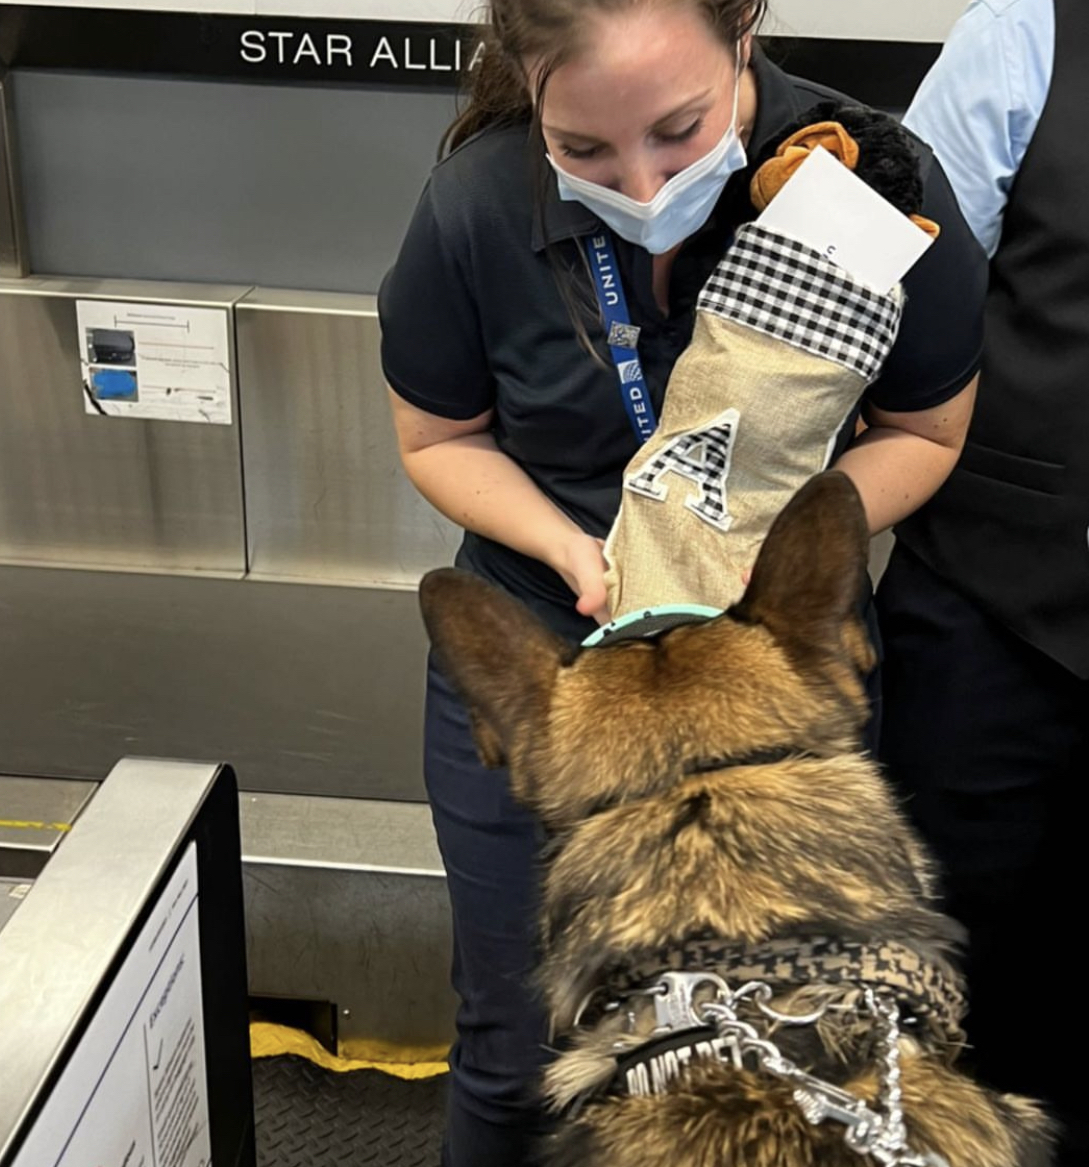 Our team in Savannah, GA (SAV) welcomed @k9arlo. Arlo was injured while on active duty earlier this year. He has since retired and was adopted by his handler, Dep. McCoy. They enjoyed surprise holiday treats and a game of fetch at the SAV baggage claim. #WeAreUGE | #UGEProud